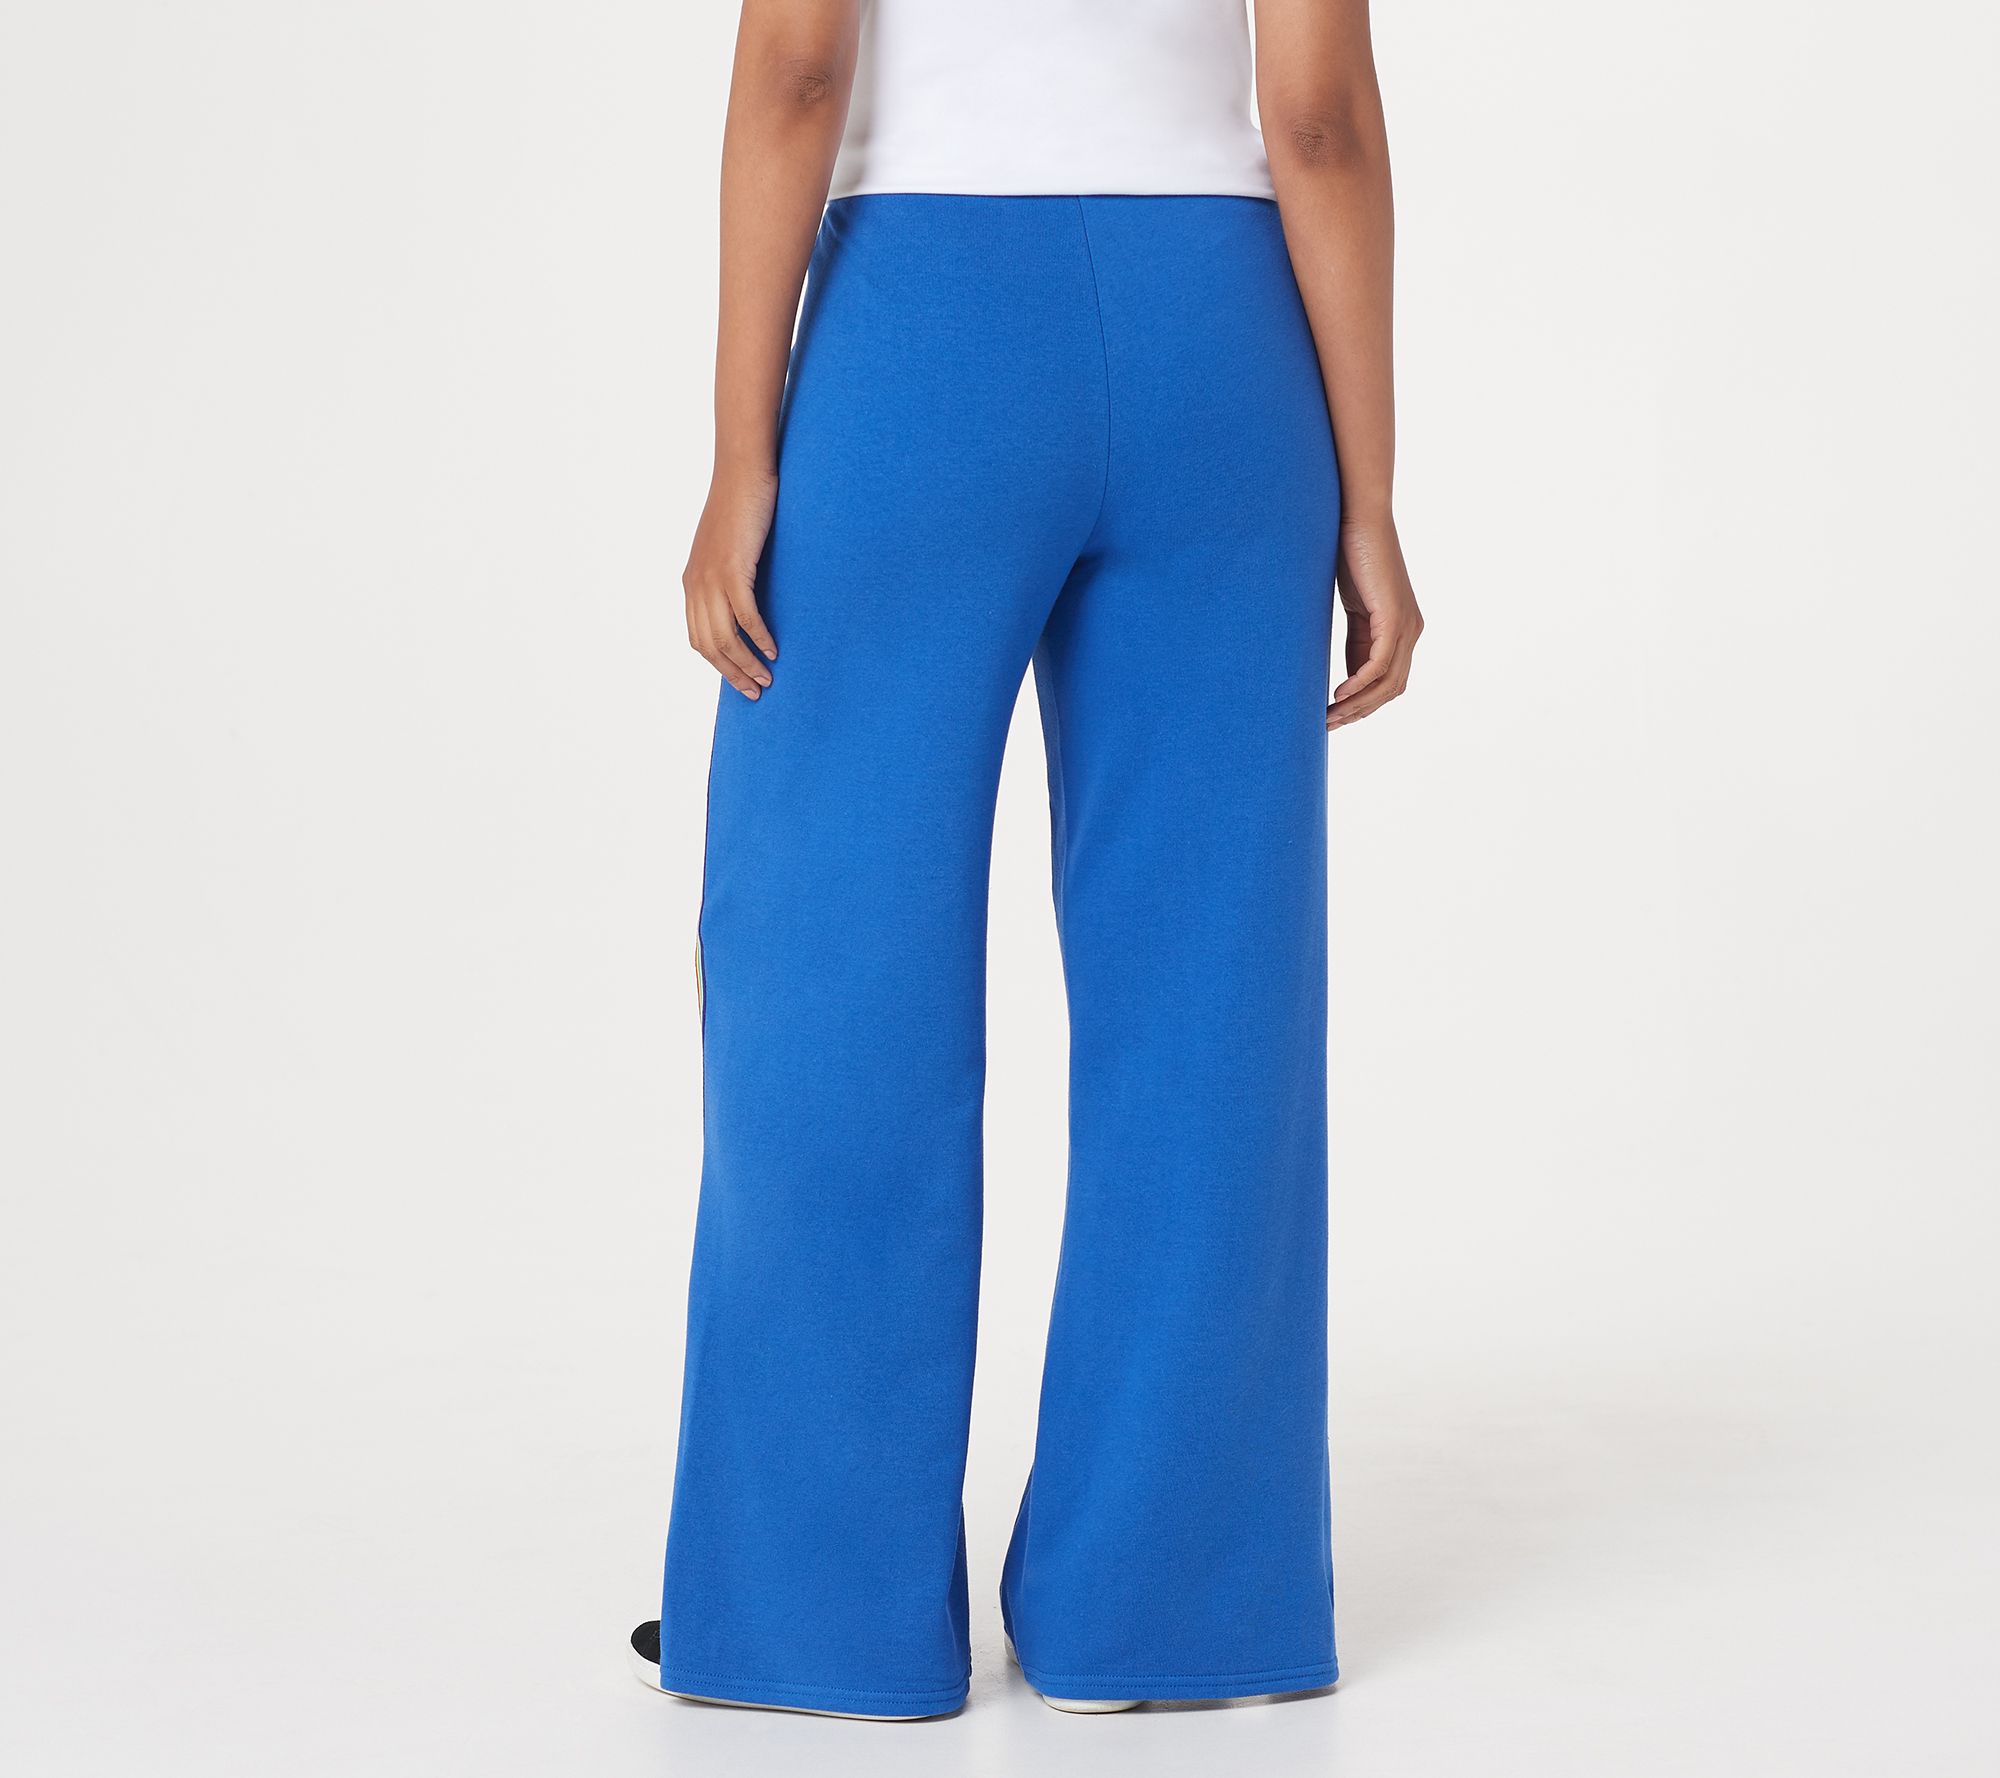 Tracy Anderson for G.I.L.I. Petite French Terry Pants - QVC.com